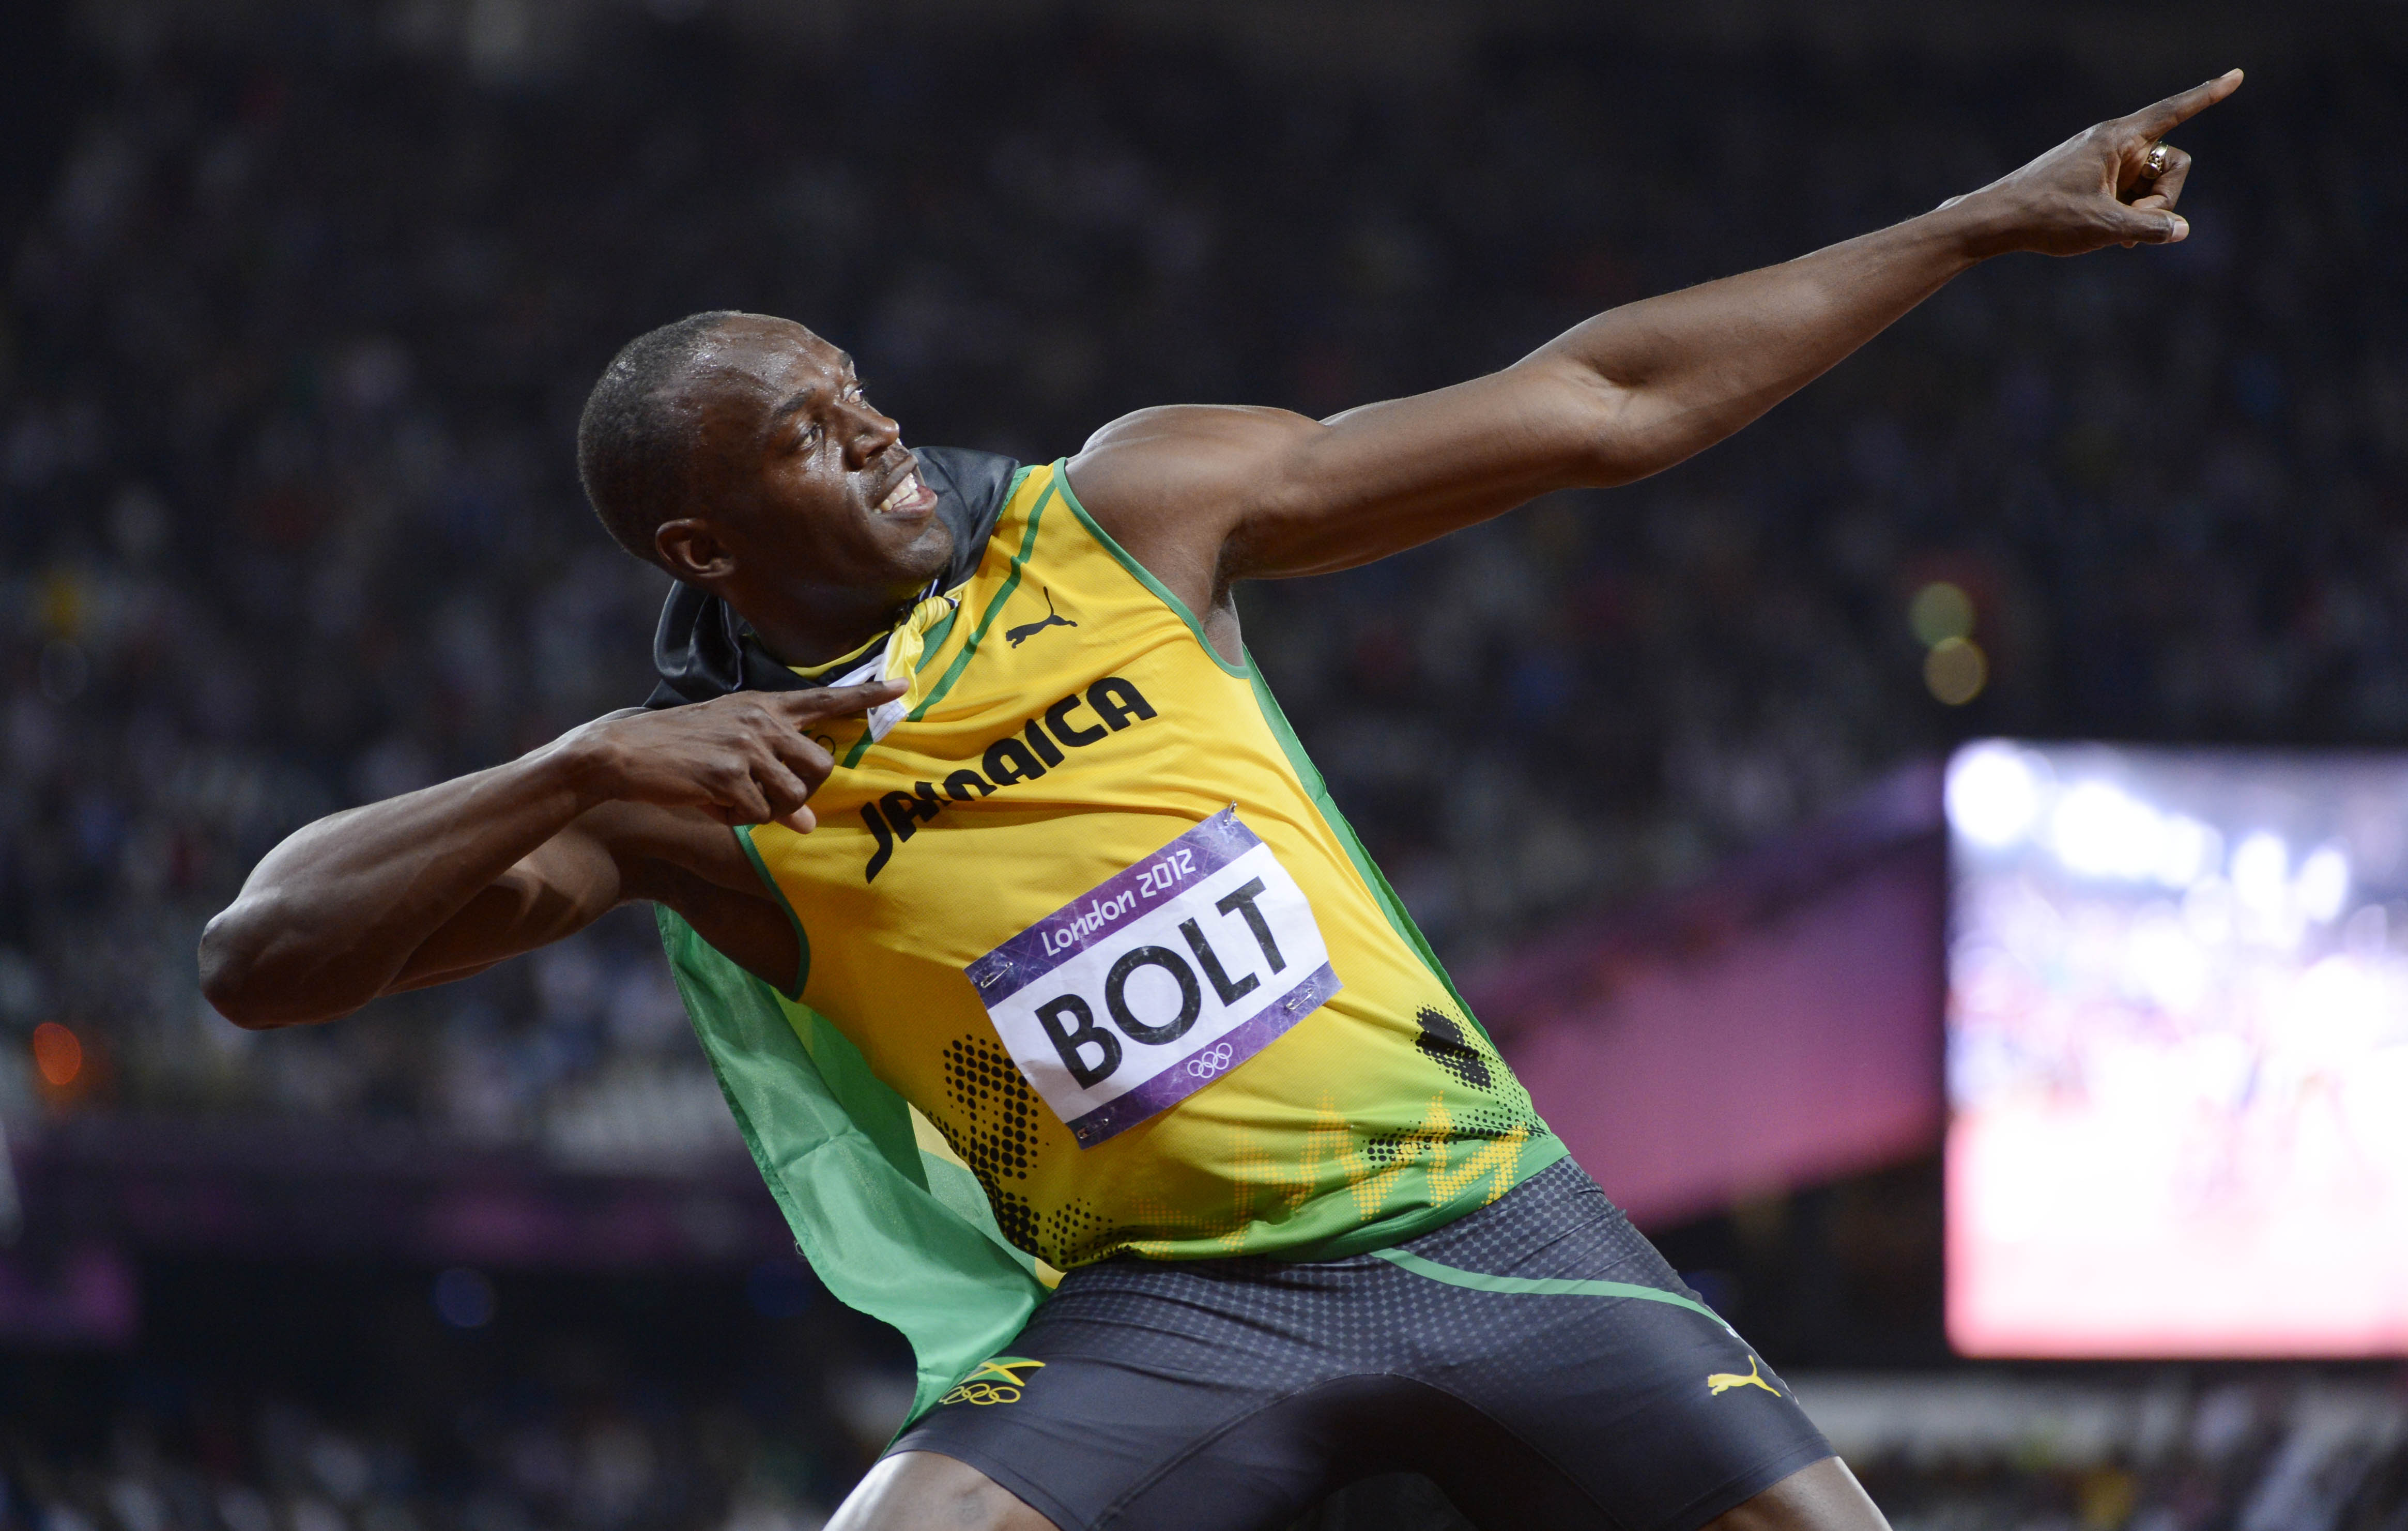 Bolt anchors Jamaica to relay record for 3rd gold